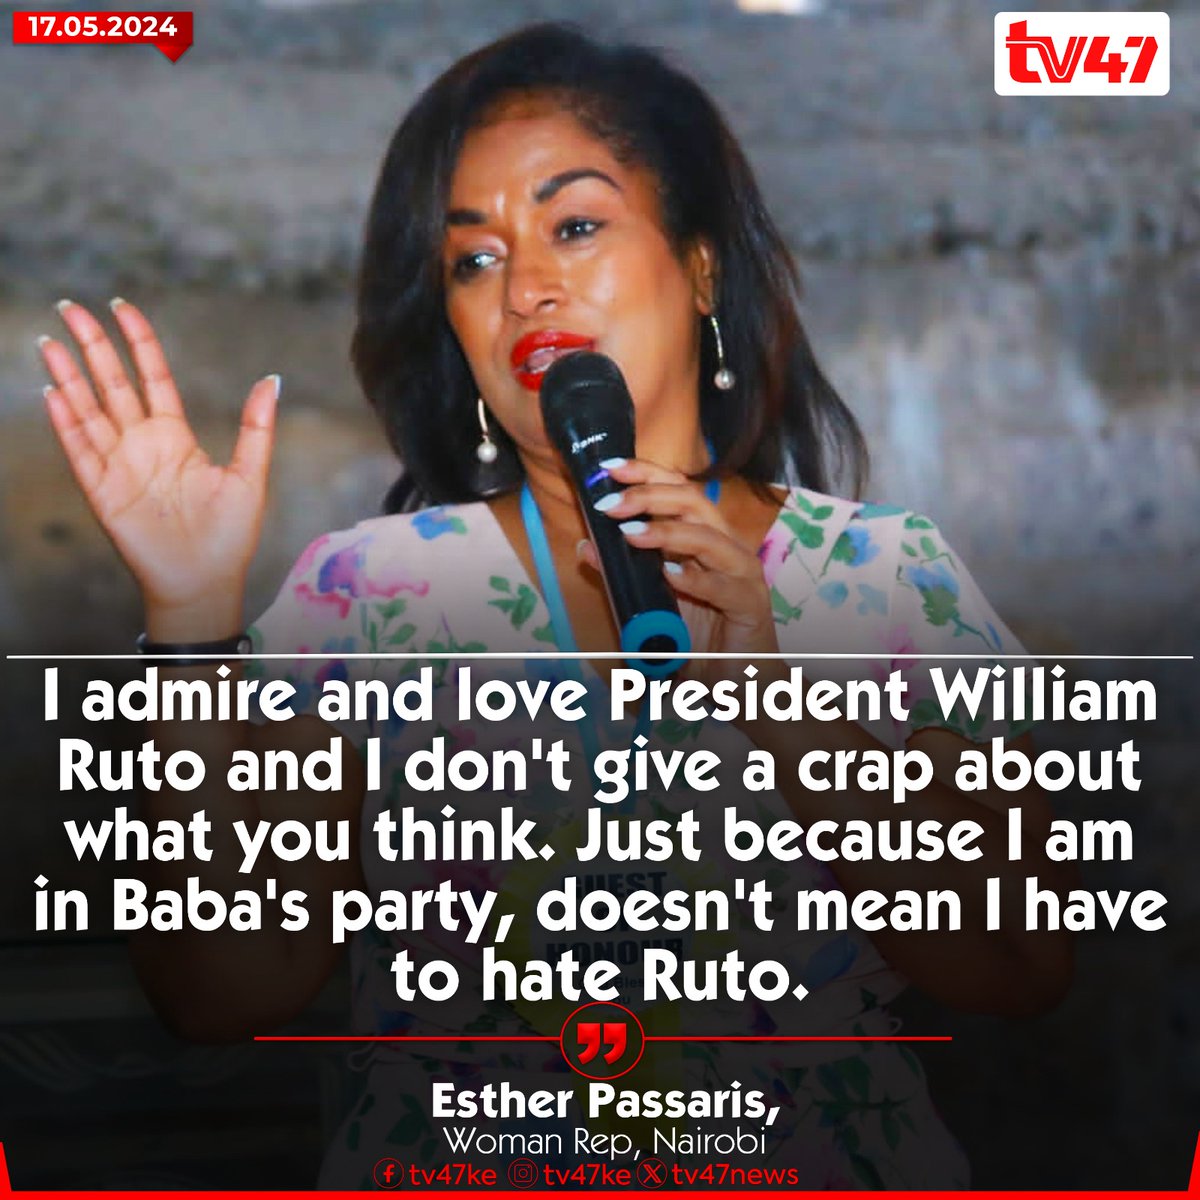 I admire and love President William Ruto and I don't give a crap about what you think. Just because I am in Baba's party, doesn't mean I have to hate Ruto. - Esther Passaris @EstherPassaris

#TV47News